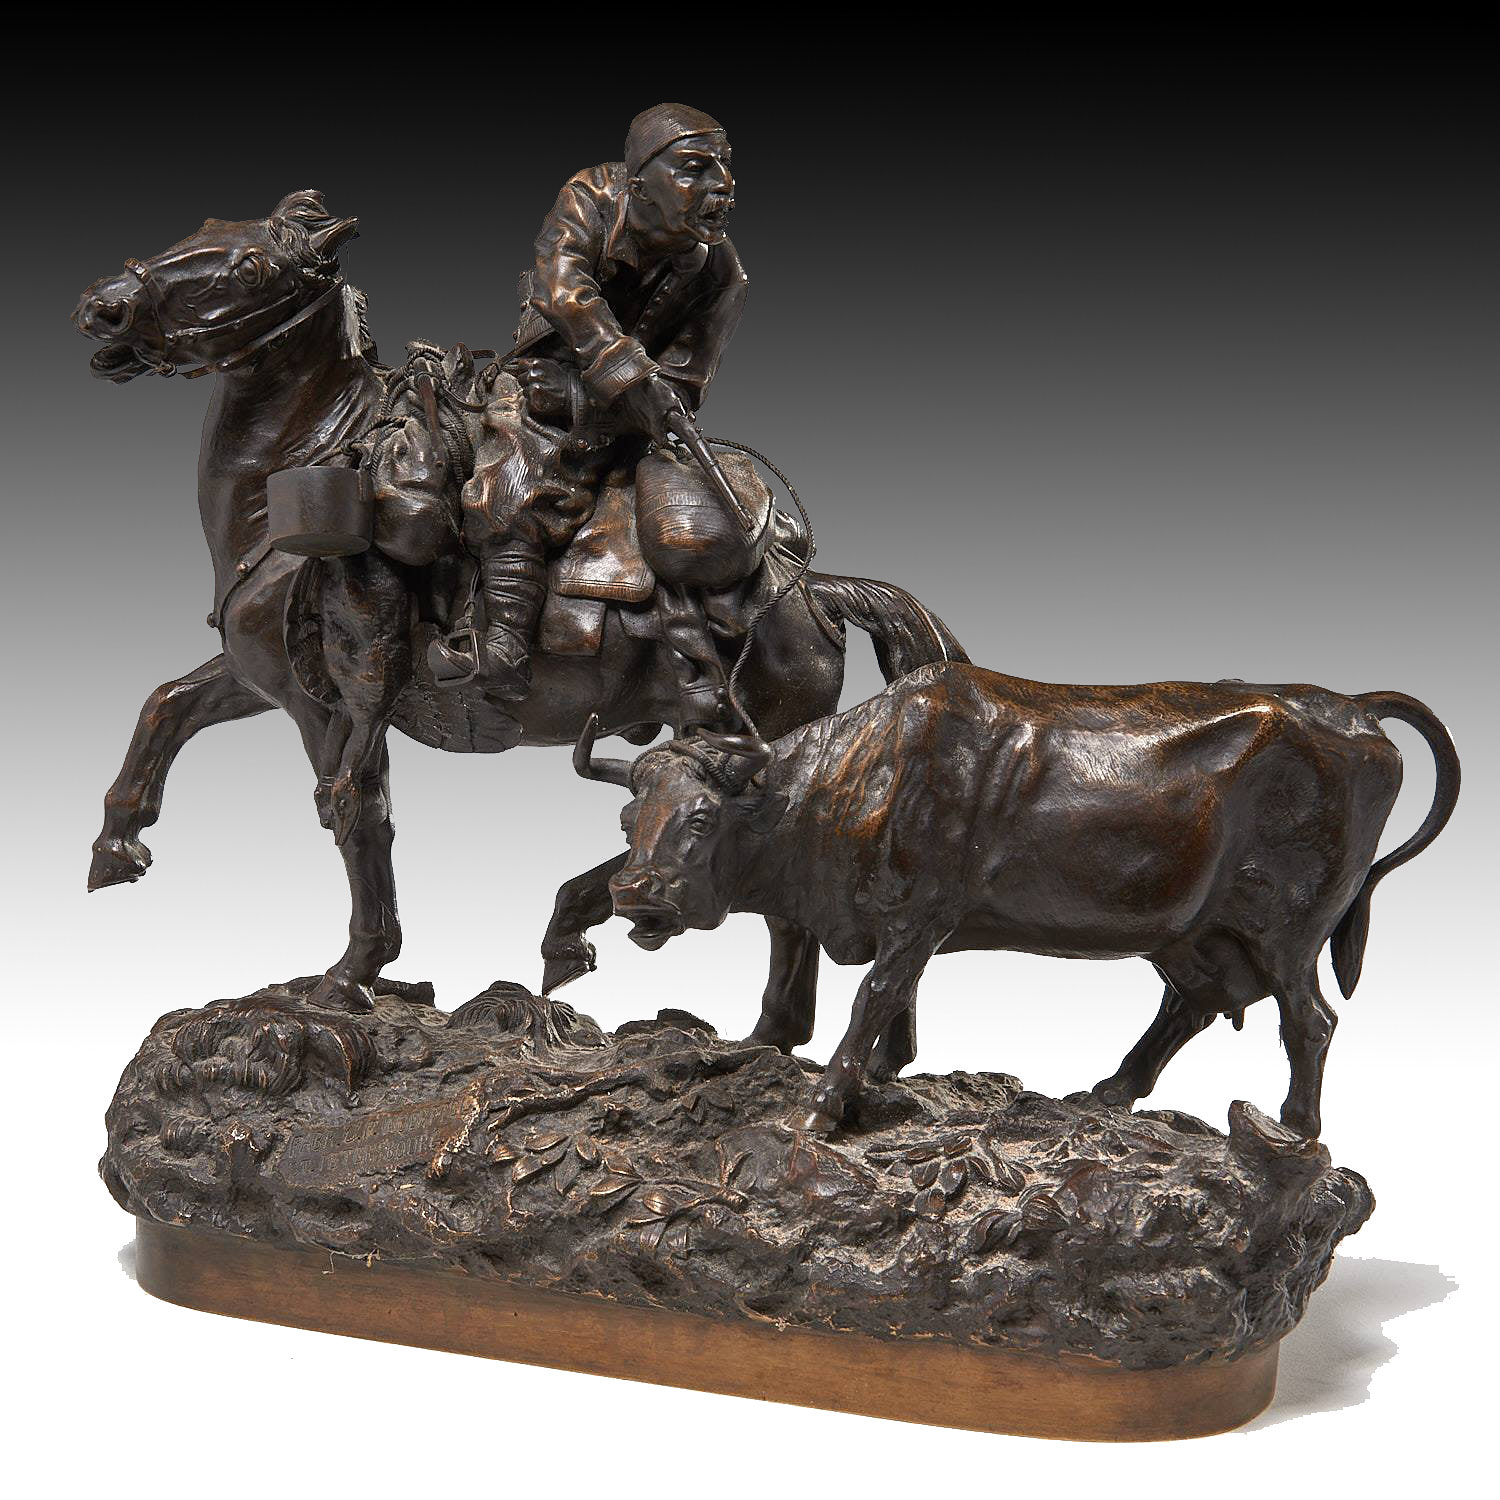 Woerffel Russian bronze of man with gun and a cow